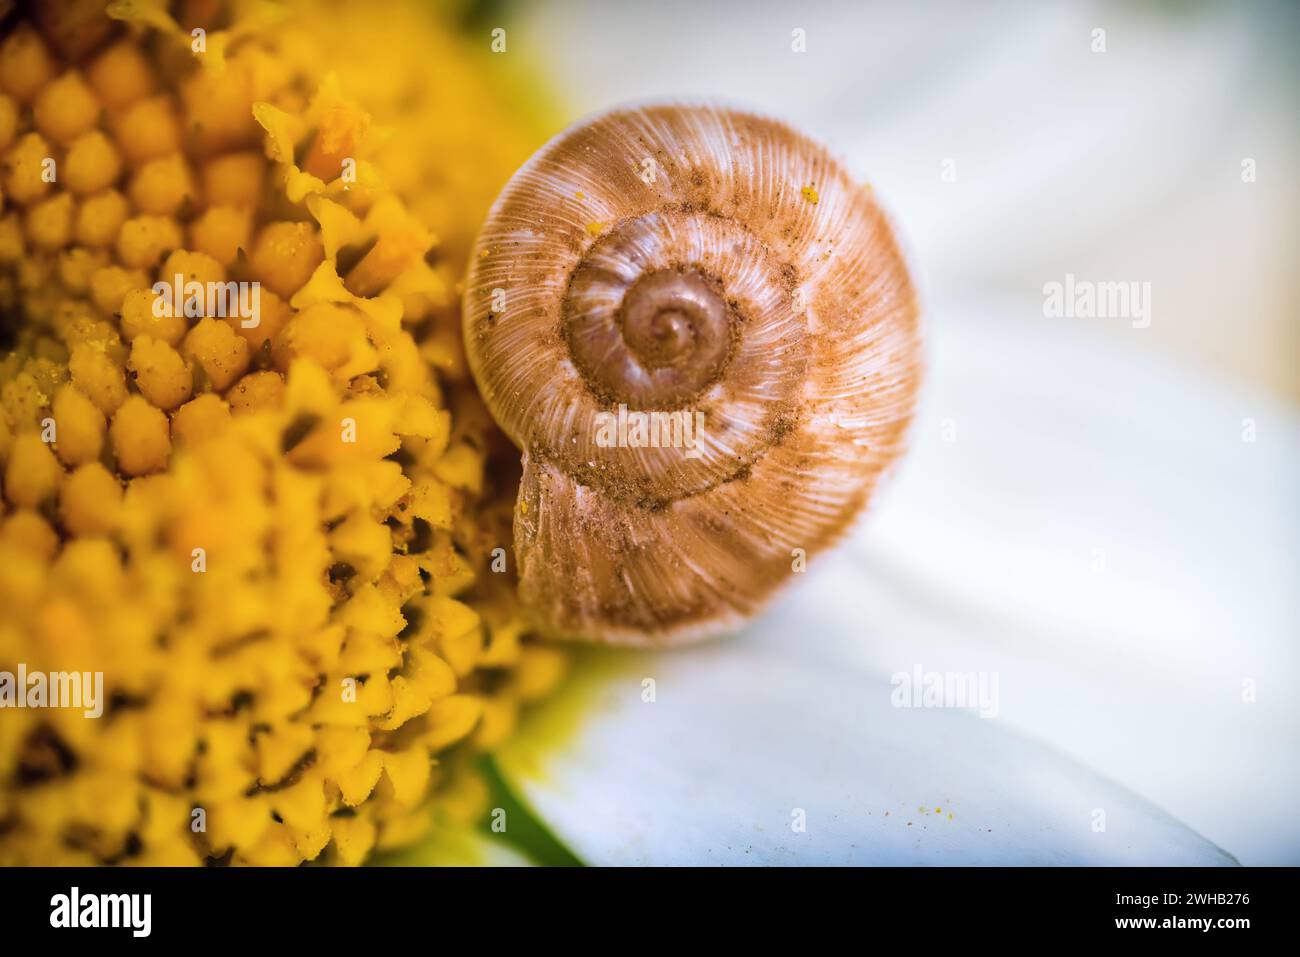 Logarithmic spiral of a snail pirn on a daisy Stock Photo